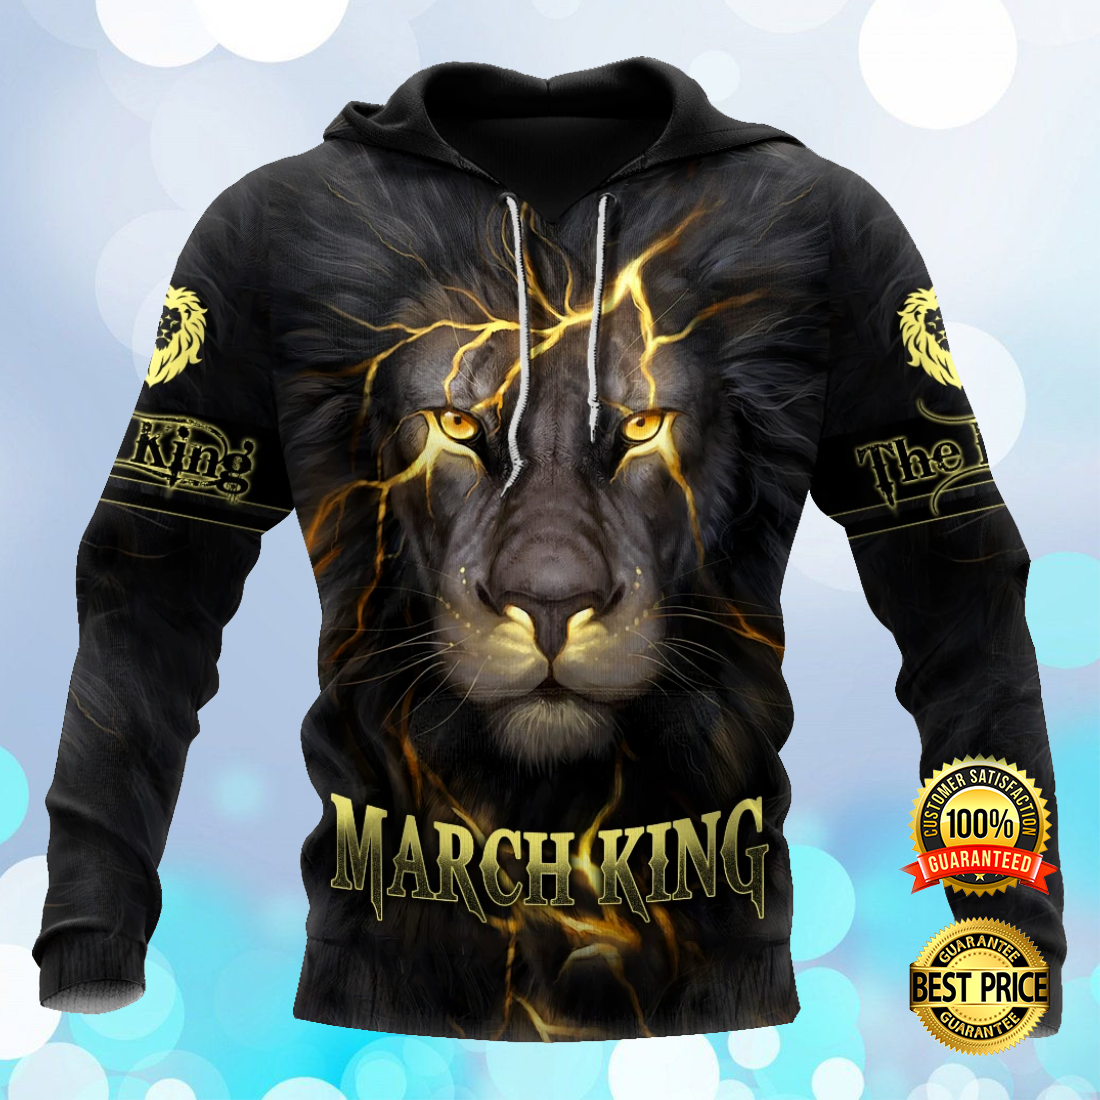 MARCH LION KING ALL OVER PRINTED 3D HOODIE